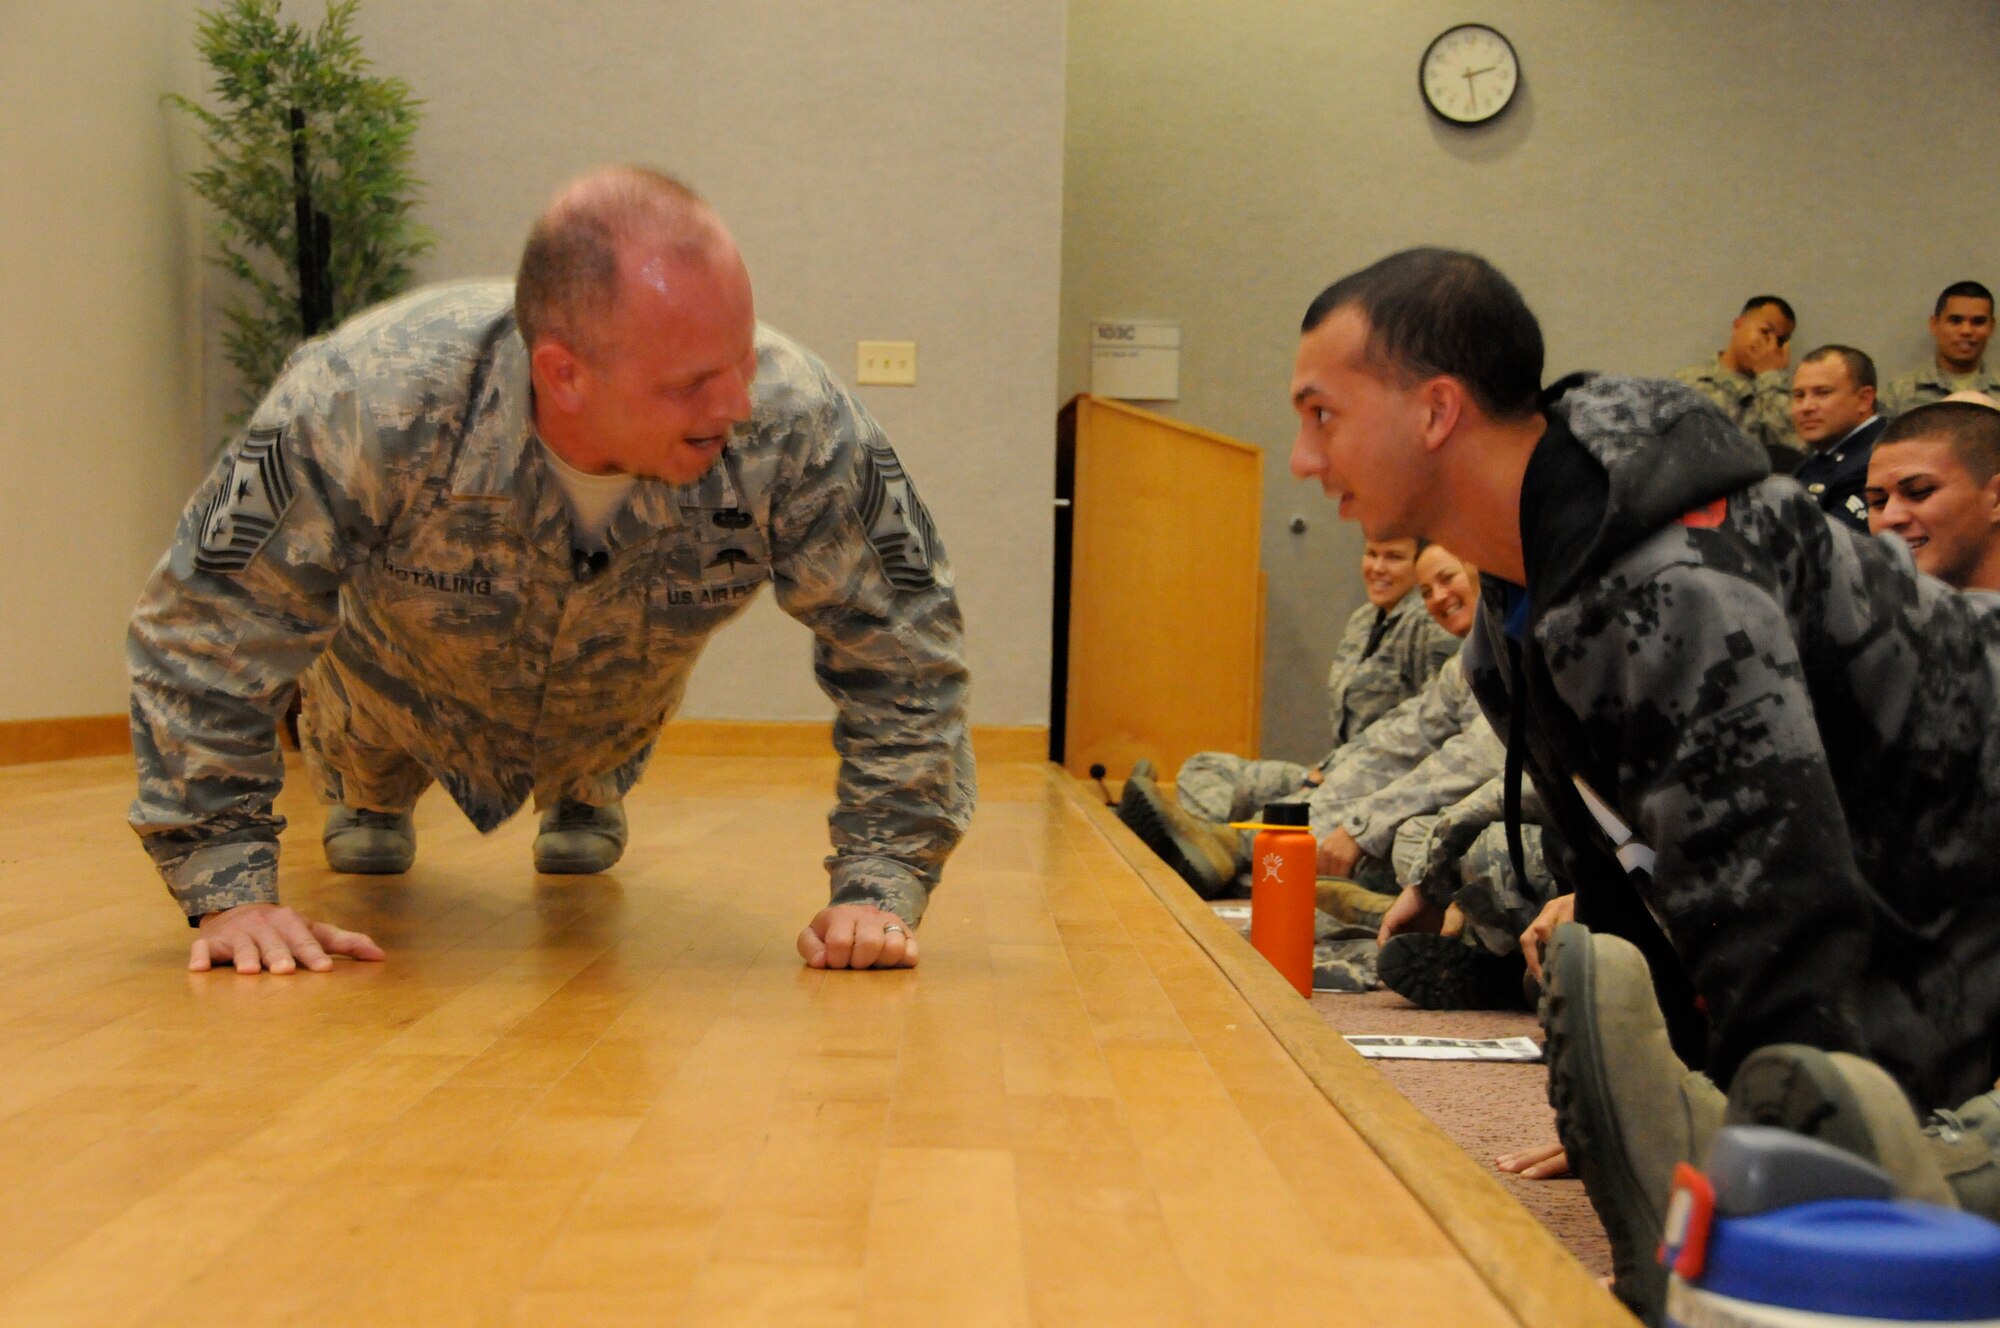 U.S. Air Force Chief Master Sgt. James W. Hotaling, command chief master sergeant of the Air National Guard, performs push-ups with newly recruited Kaimana Mattson, Hawaii Air National Guard, during a Town Hall Meeting at Joint Base Pearl Harbor Hickam on Nov. 9, 2014. Mattson is a prospective recruit for the 203rd Air Refueling Squadron in student flight and is awaiting orders for Basic Military Training. (U.S. Air National Guard photo by Airman 1st Class Robert Cabuco)